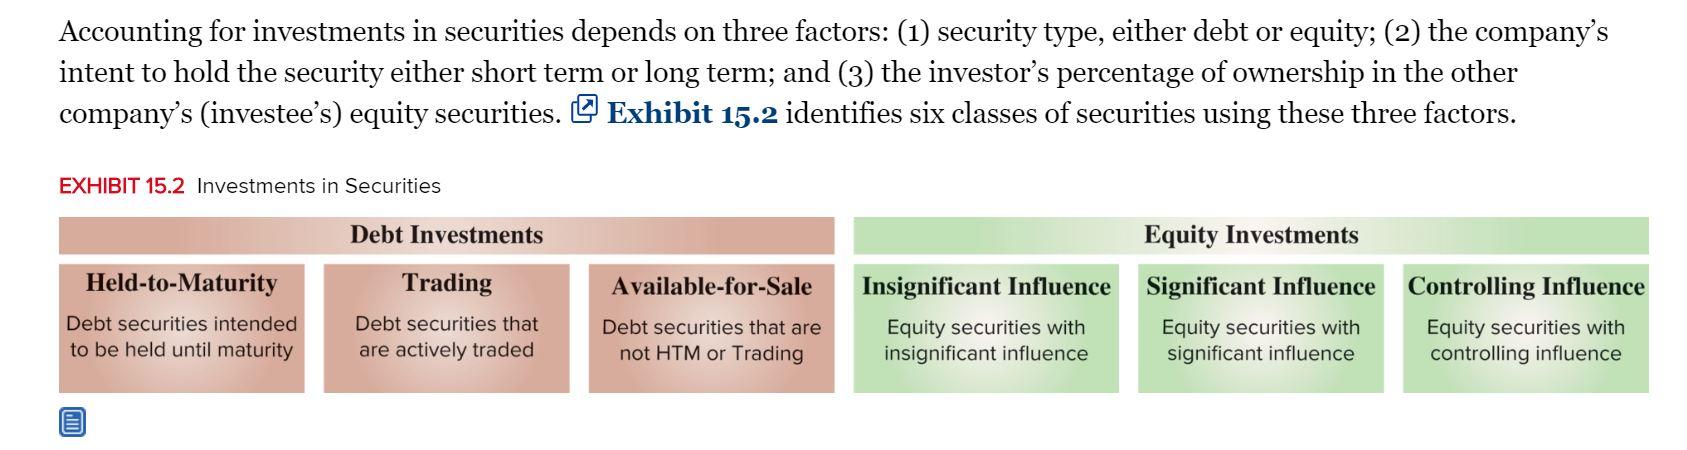 Accounting for investments in securities depends on three factors: (1) security type, either debt or equity; (2) the company